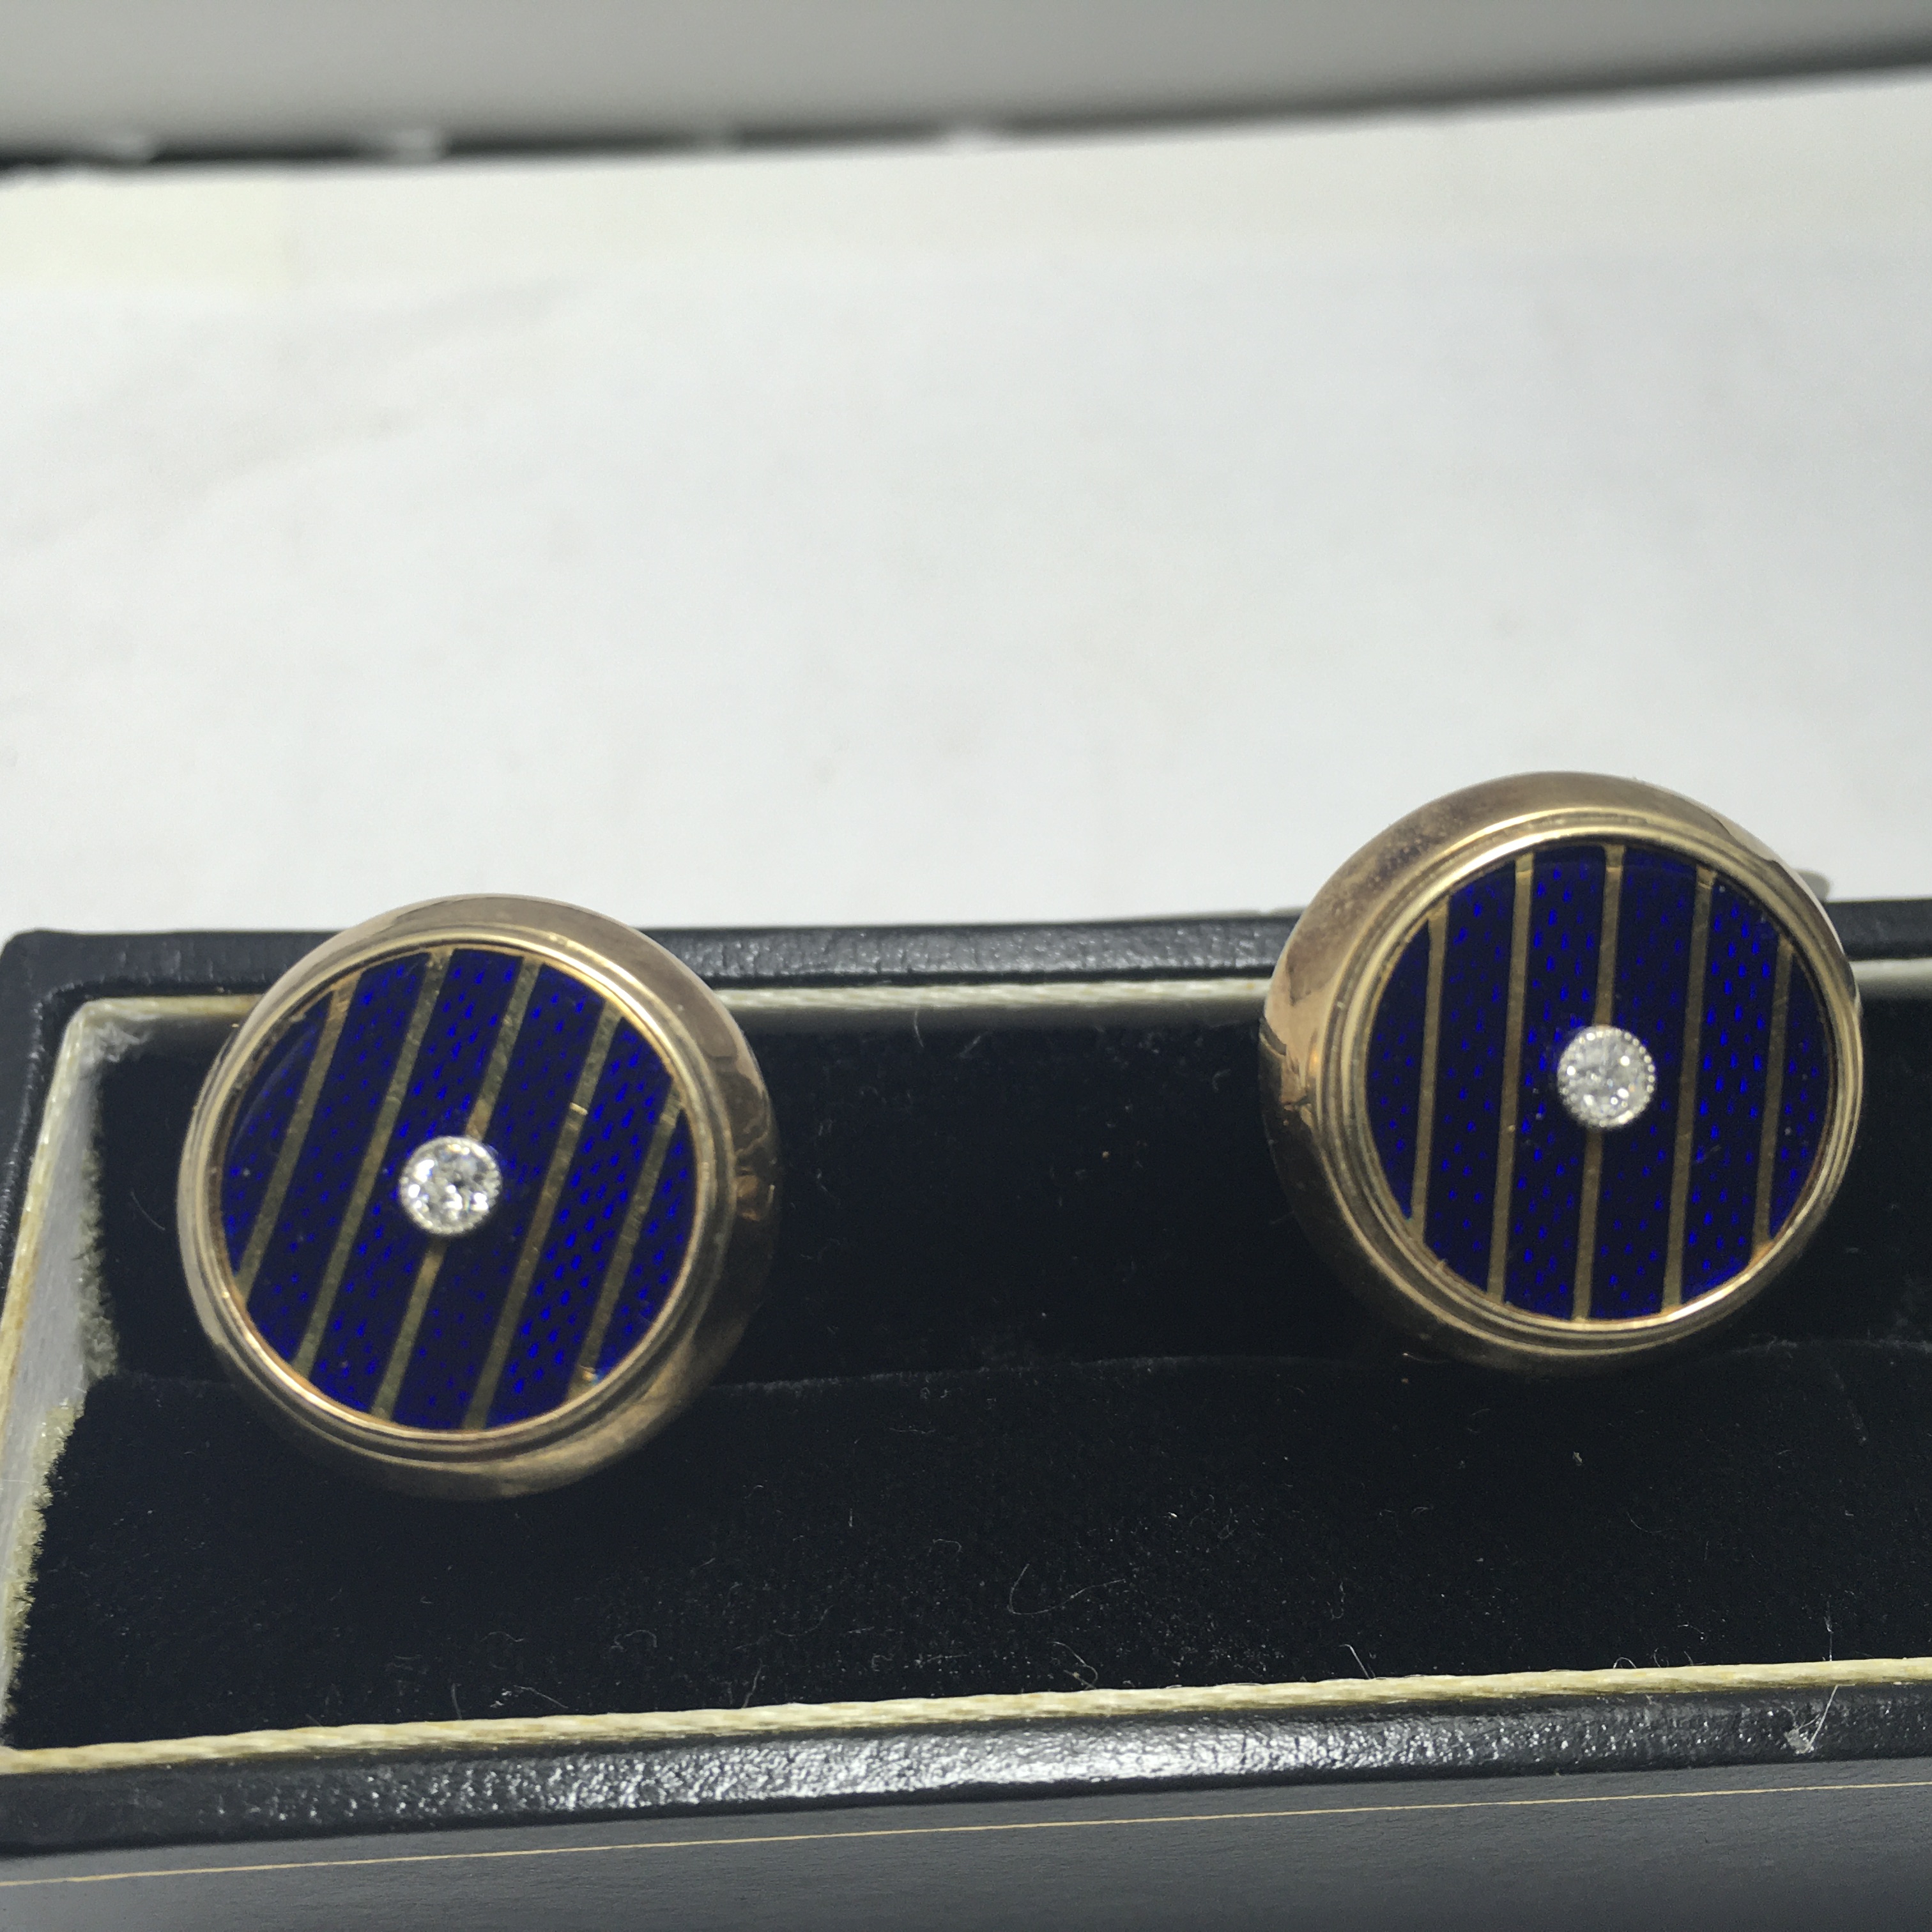 Stunning pair of diamond and lapis Lazuli Gent's cuff links both marked 18ct gold, 16.3 grams - Image 2 of 8